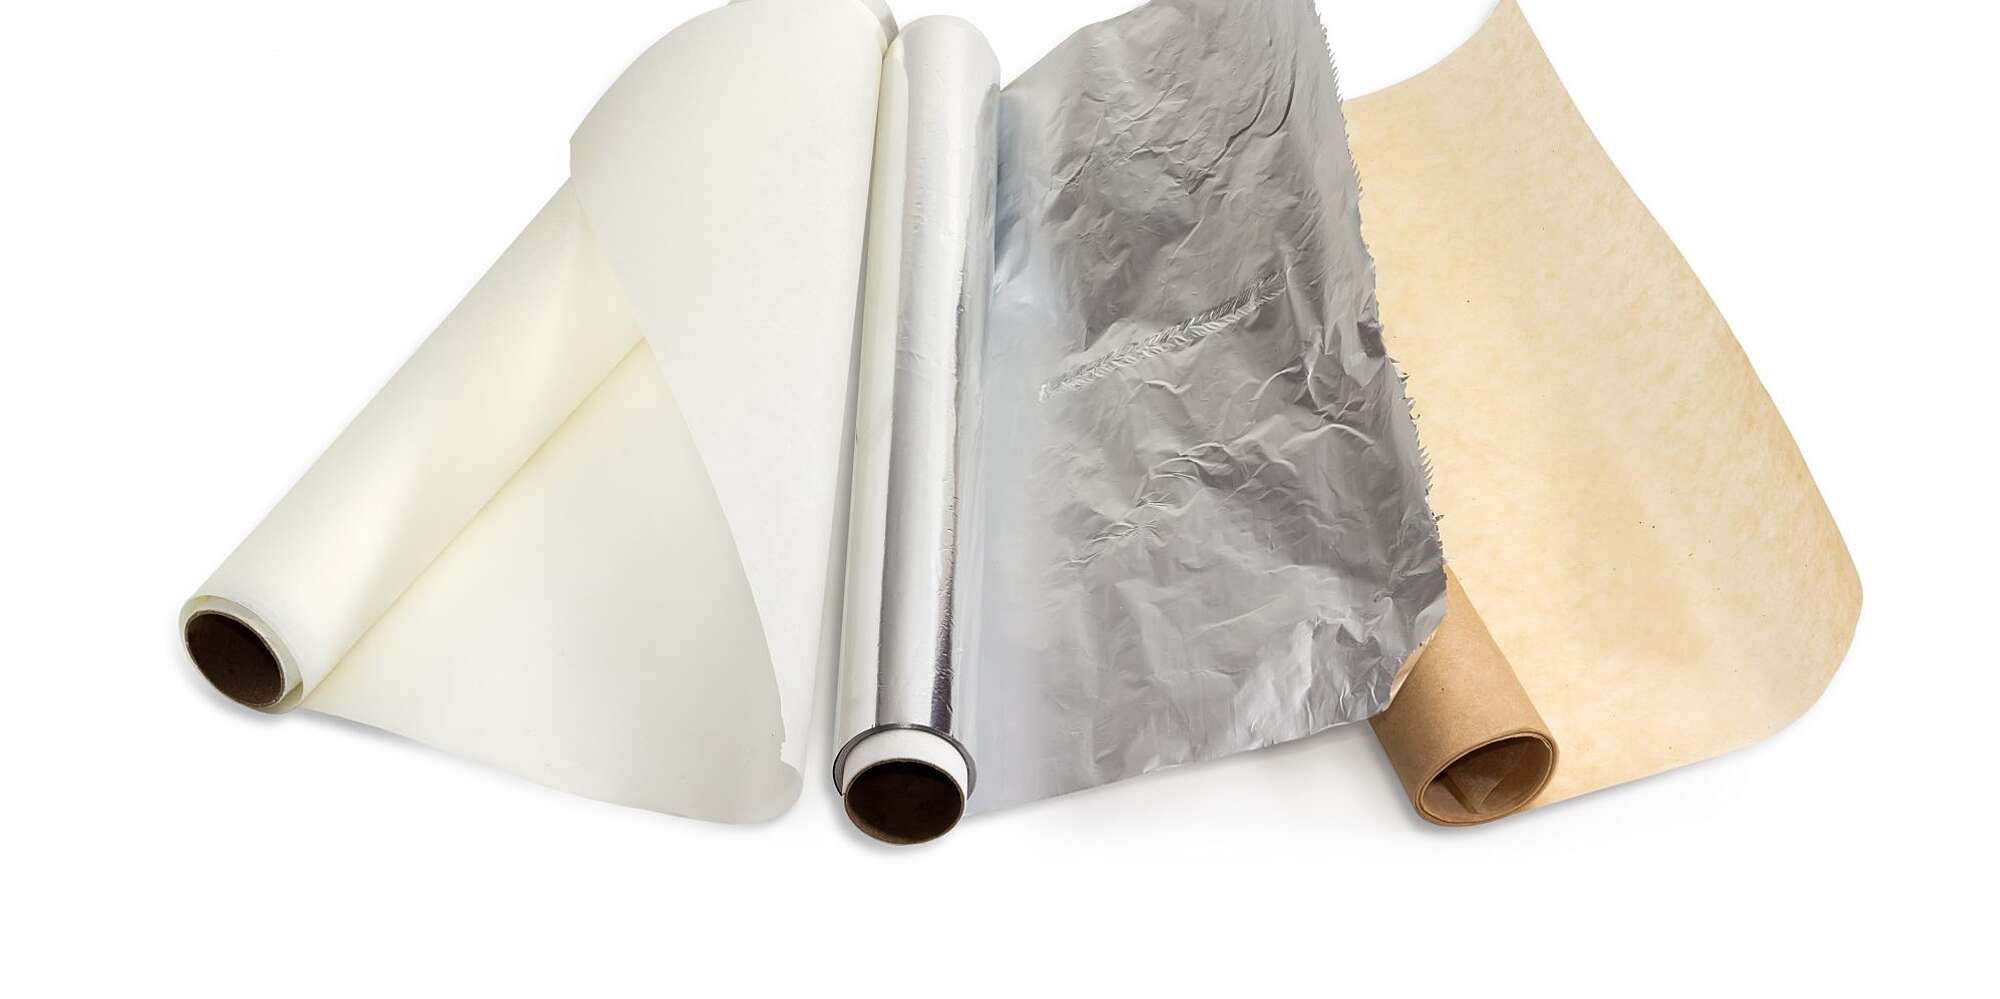 Why You Should Use Parchment Paper - Can You Substitute Foil or